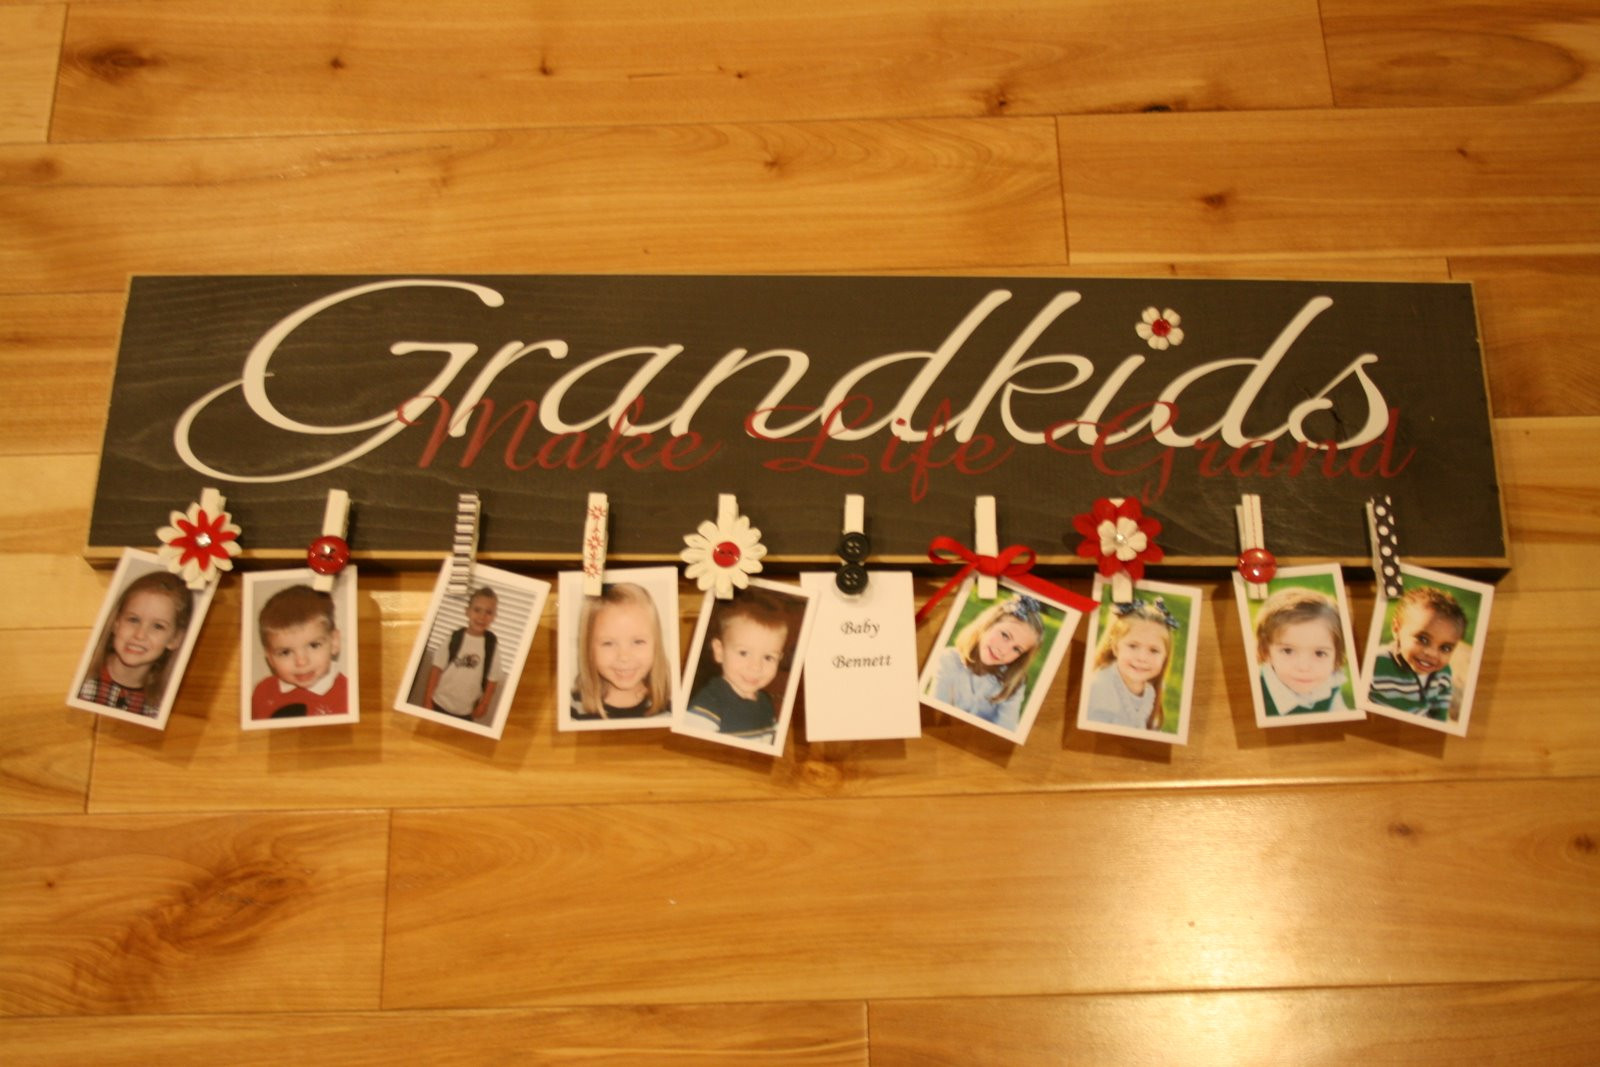 Grandmother Christmas Gift Ideas
 8 of my favorite Gift Ideas for Grandma for Mothers Day